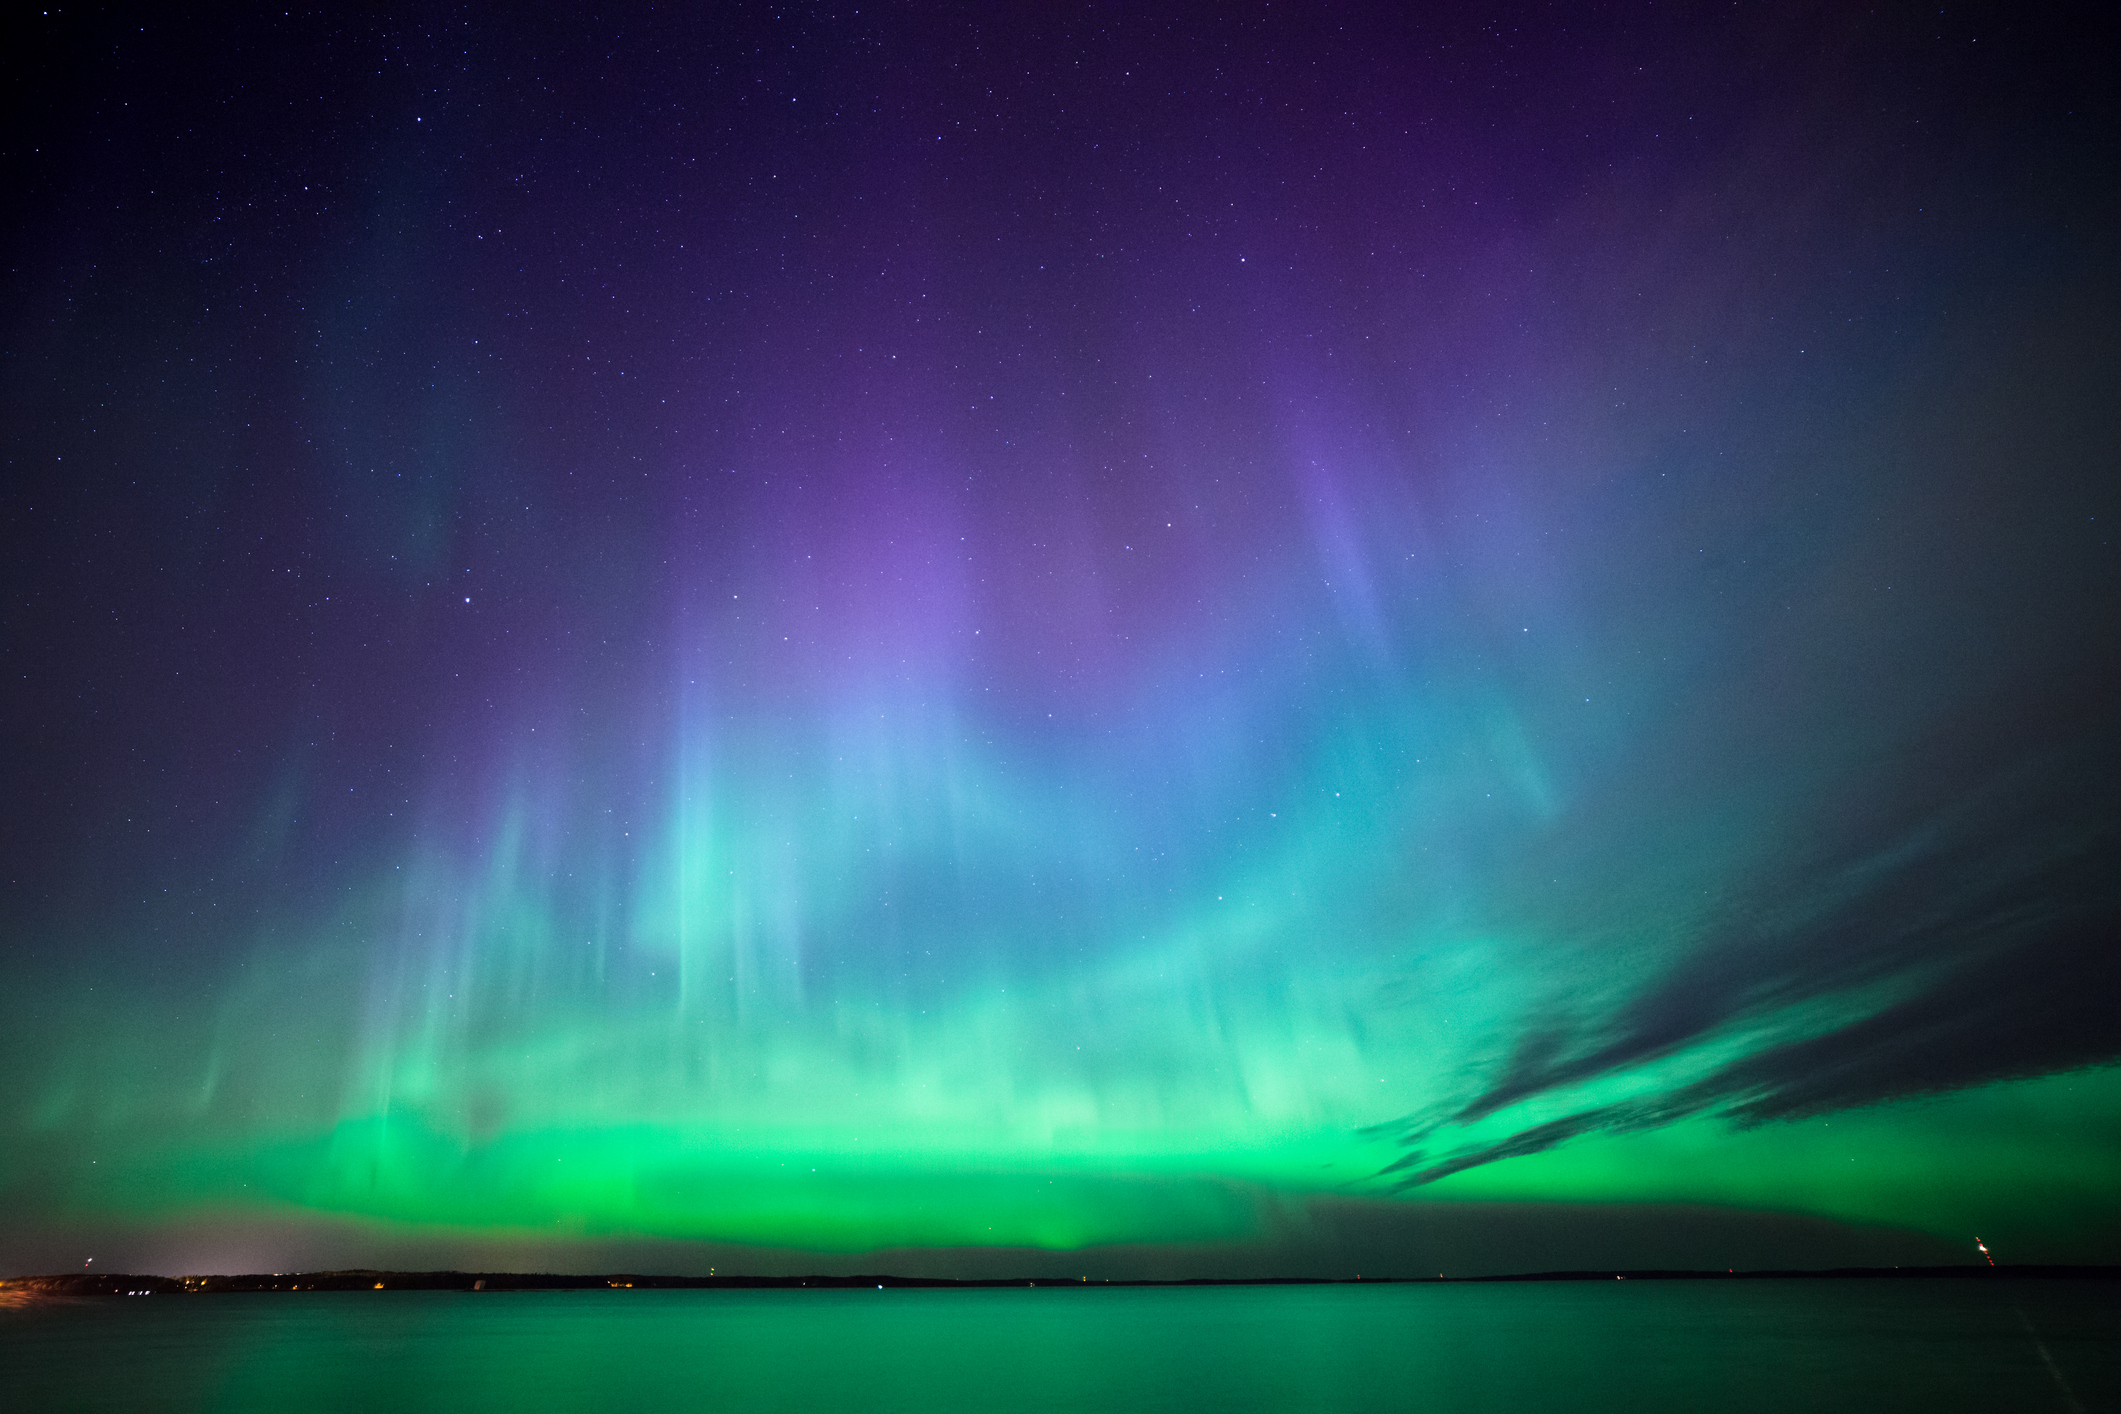 Solar Storm Could See Northern Lights Shimmering in U.S. Skies This Week